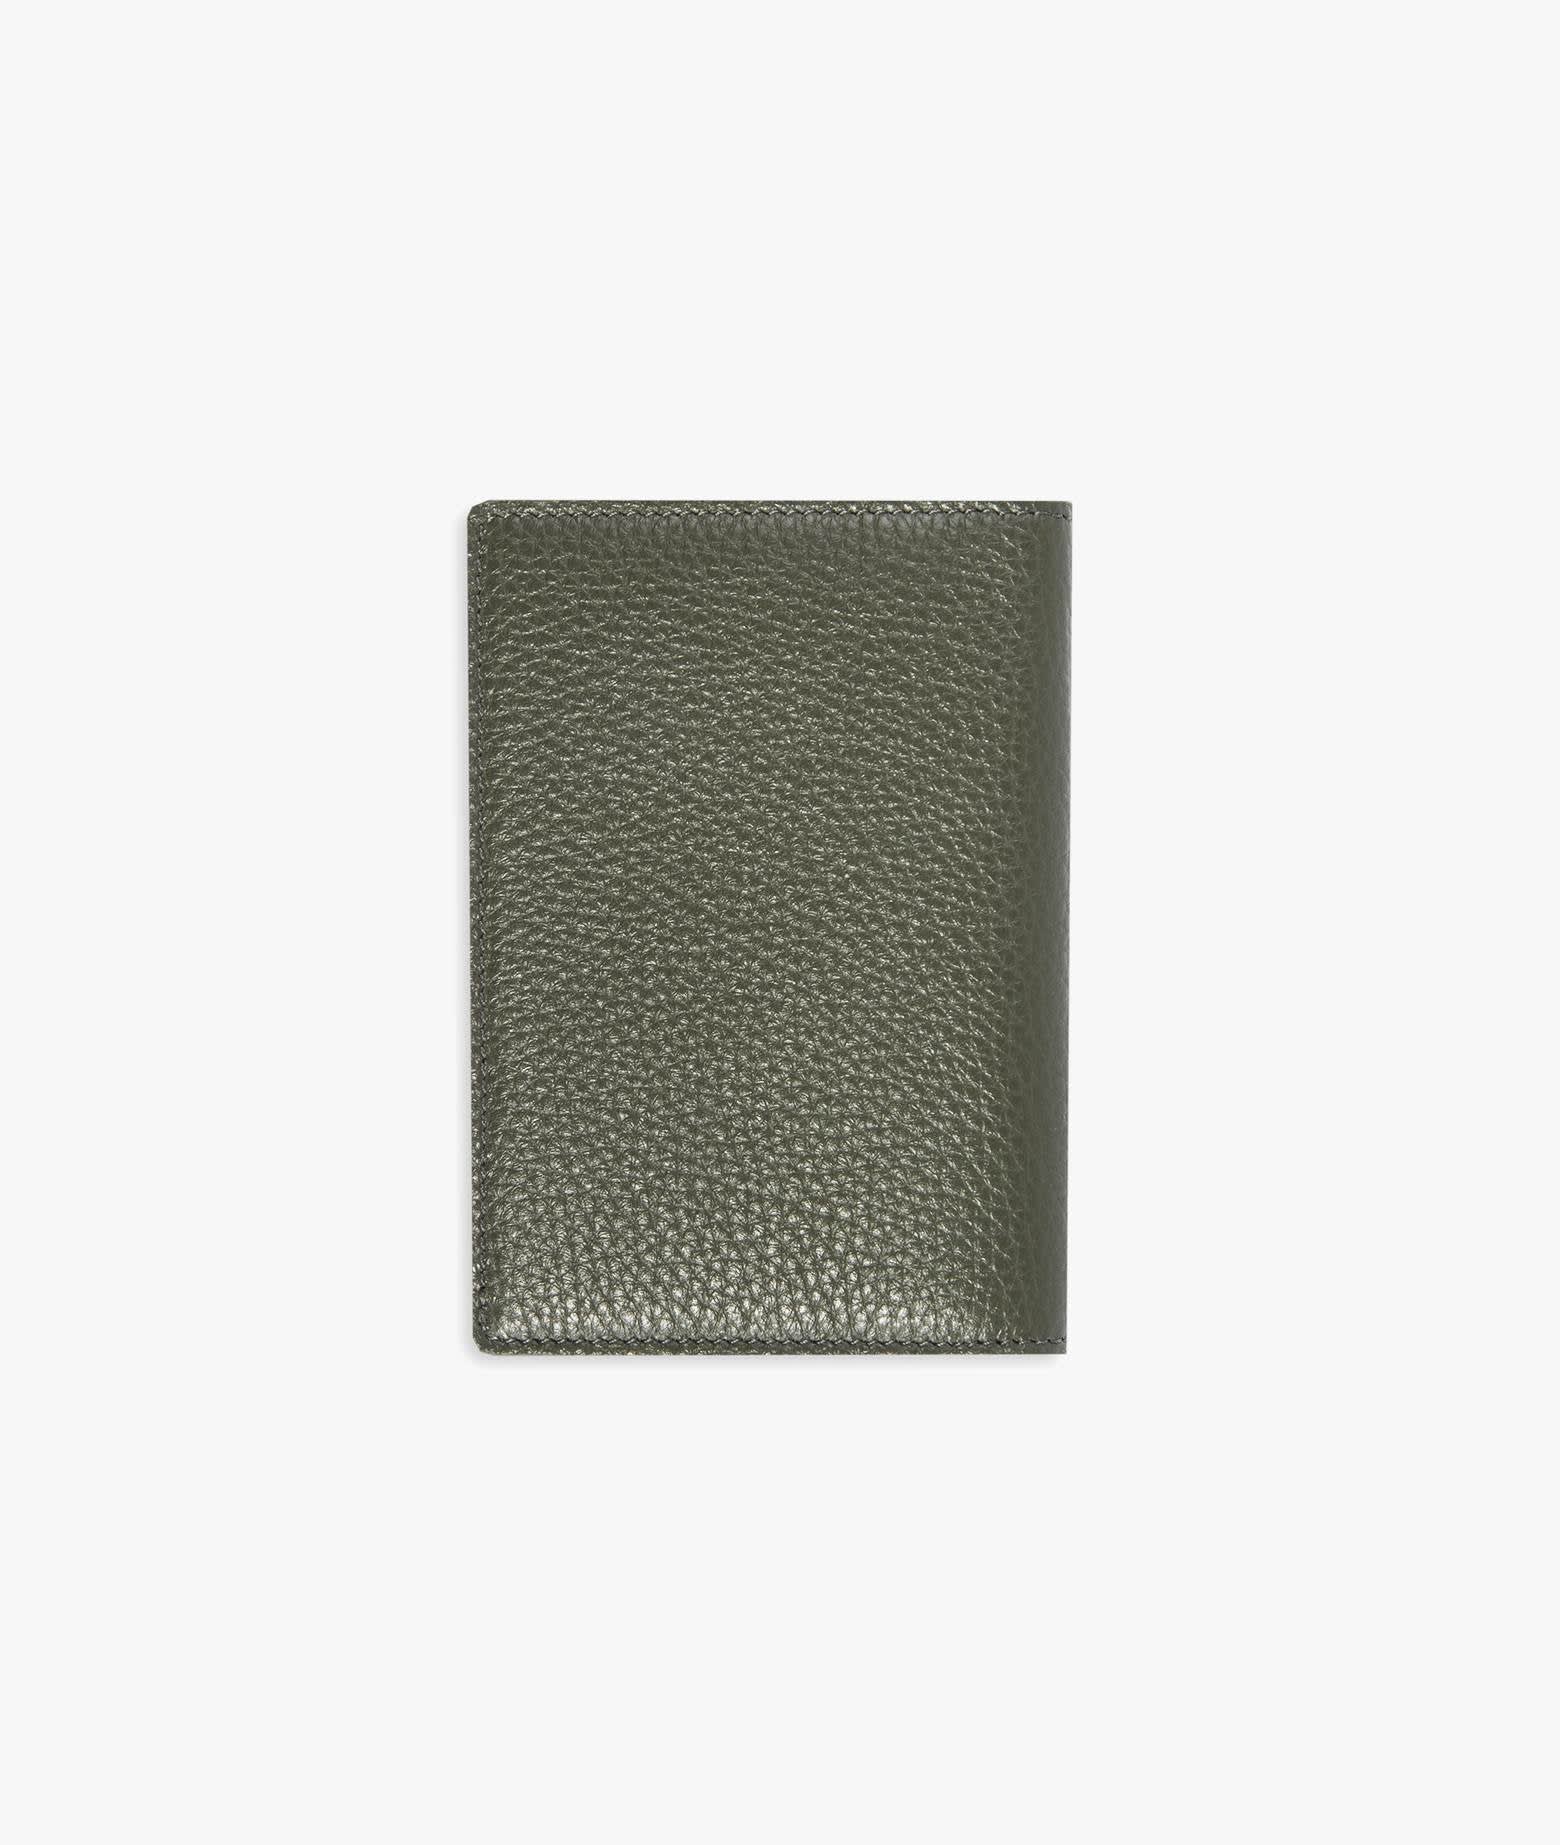 Shop Larusmiani Passport Cover Fiumicino Wallet In Olive